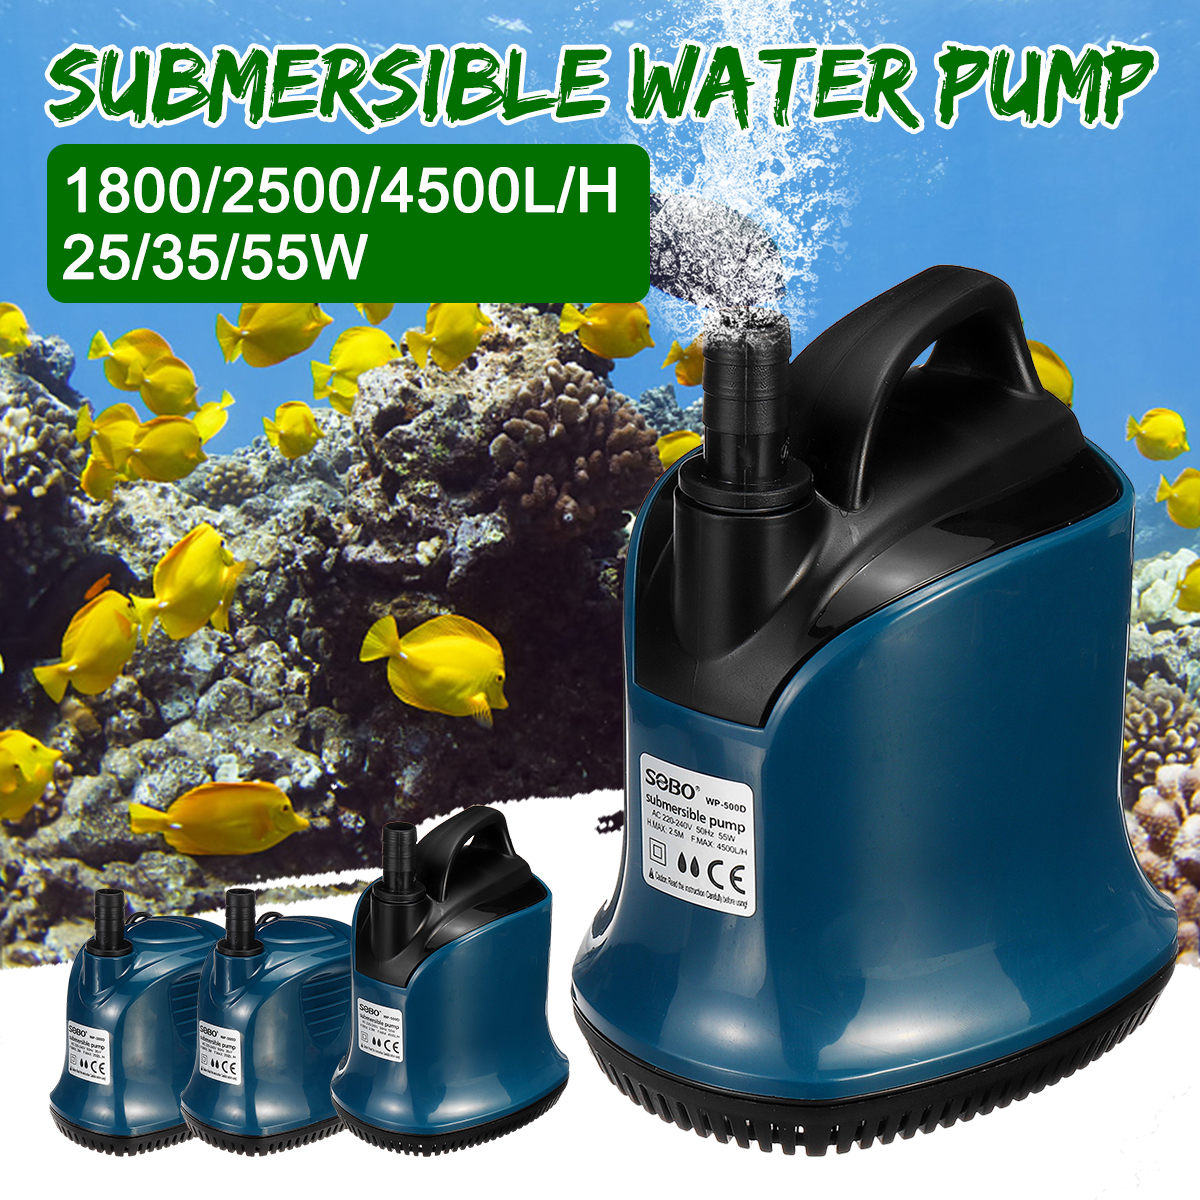 Submersible Pump Ultra Quiet Water Pump Fountain Pump Submersible Water Pump Aquarium Fish Pond Tank Fountains